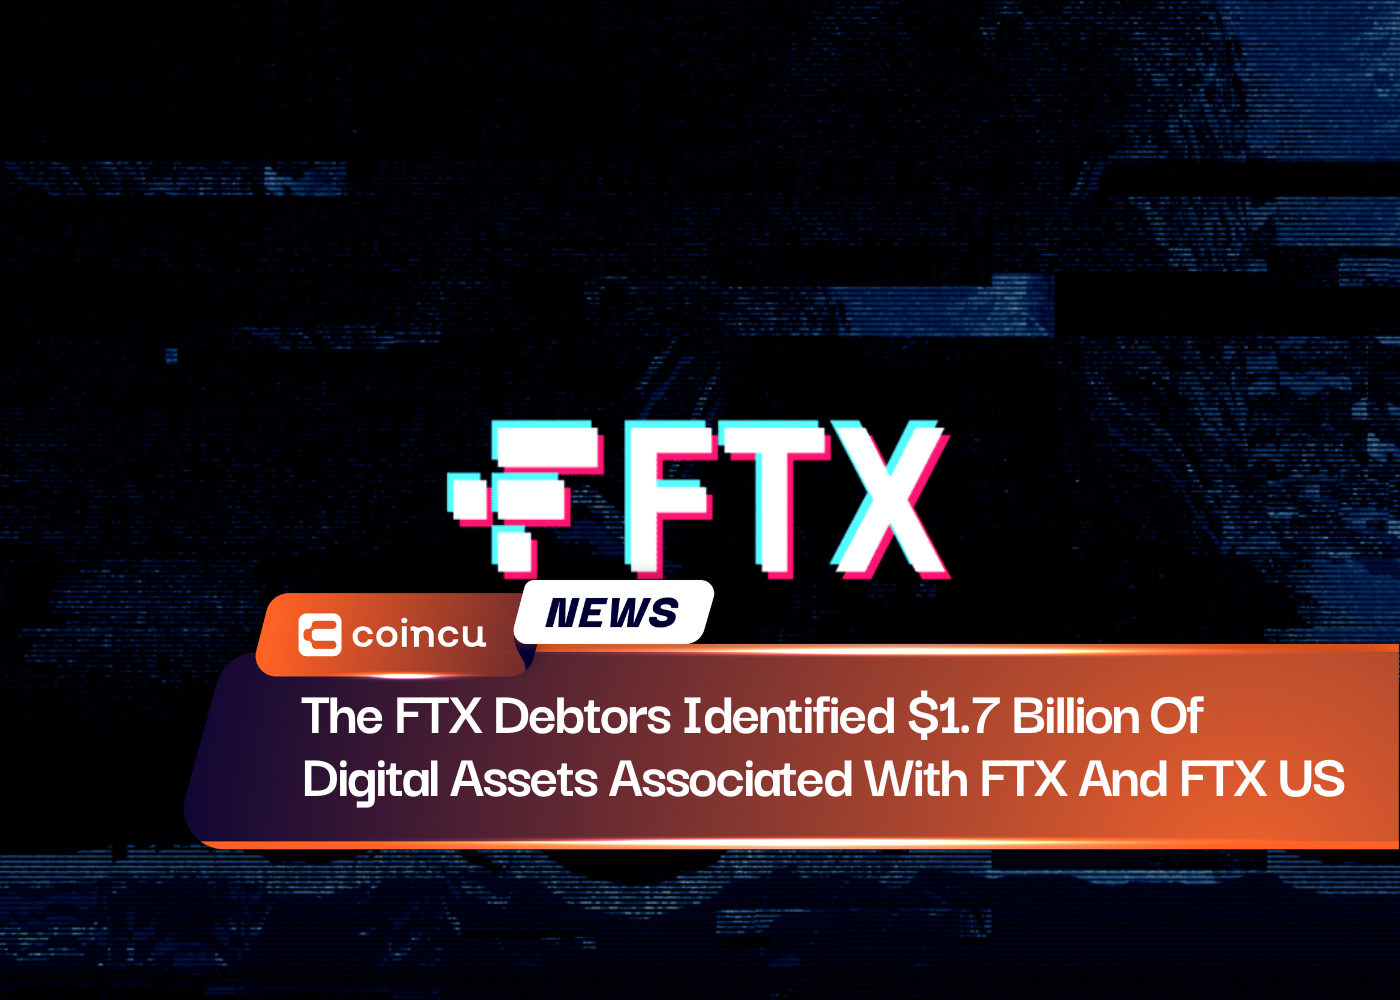 The FTX Debtors Identified $1.7 Billion Of Digital Assets Associated With FTX And FTX US